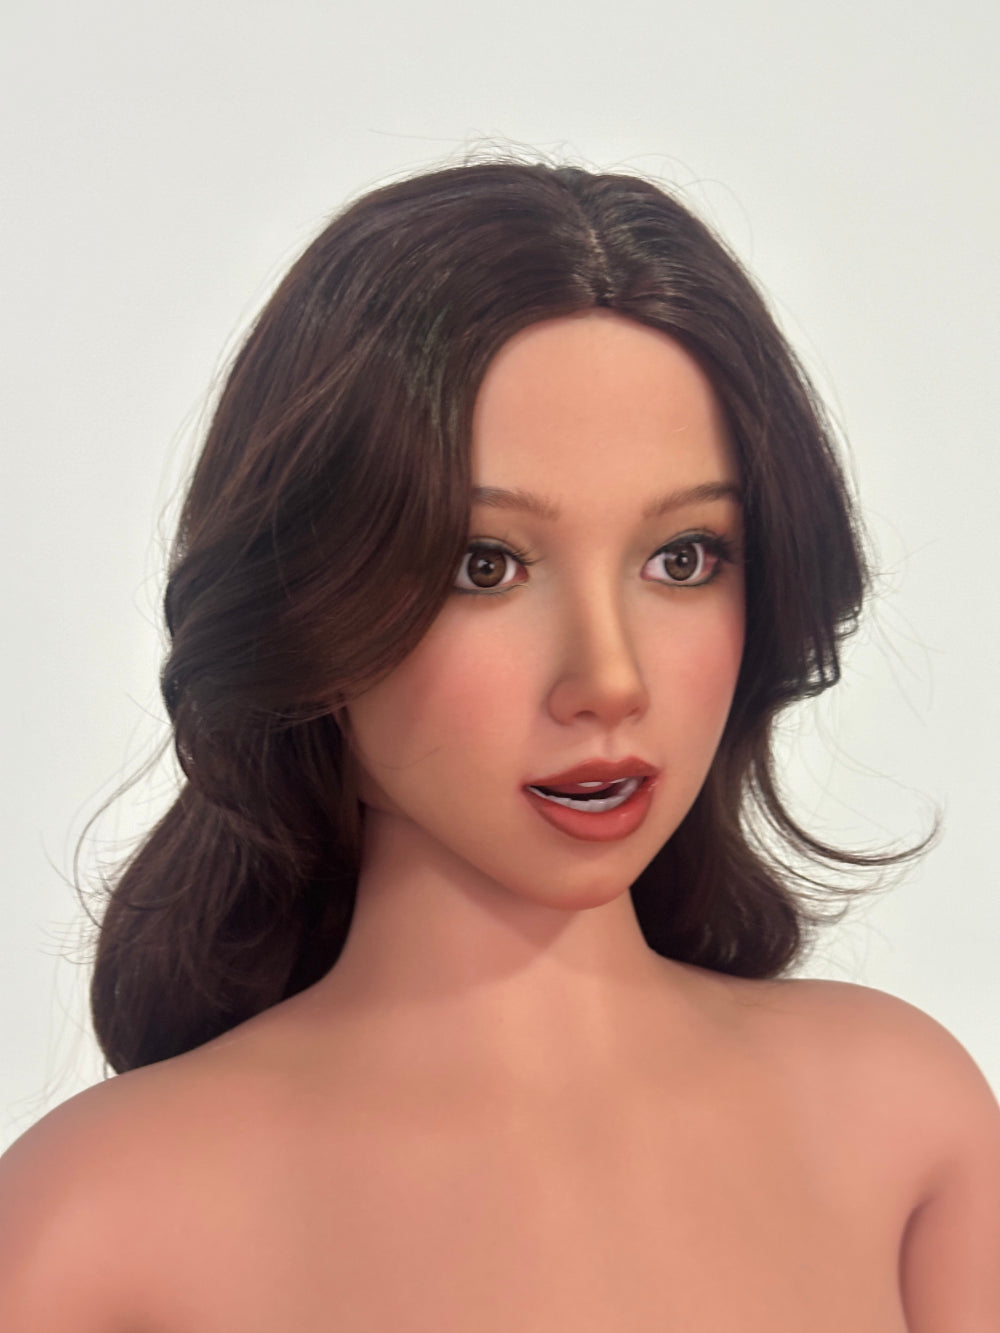 Zelex Doll SLE Series 165 cm D Silicone - ZXE209-2 Movable Jaw (USA)